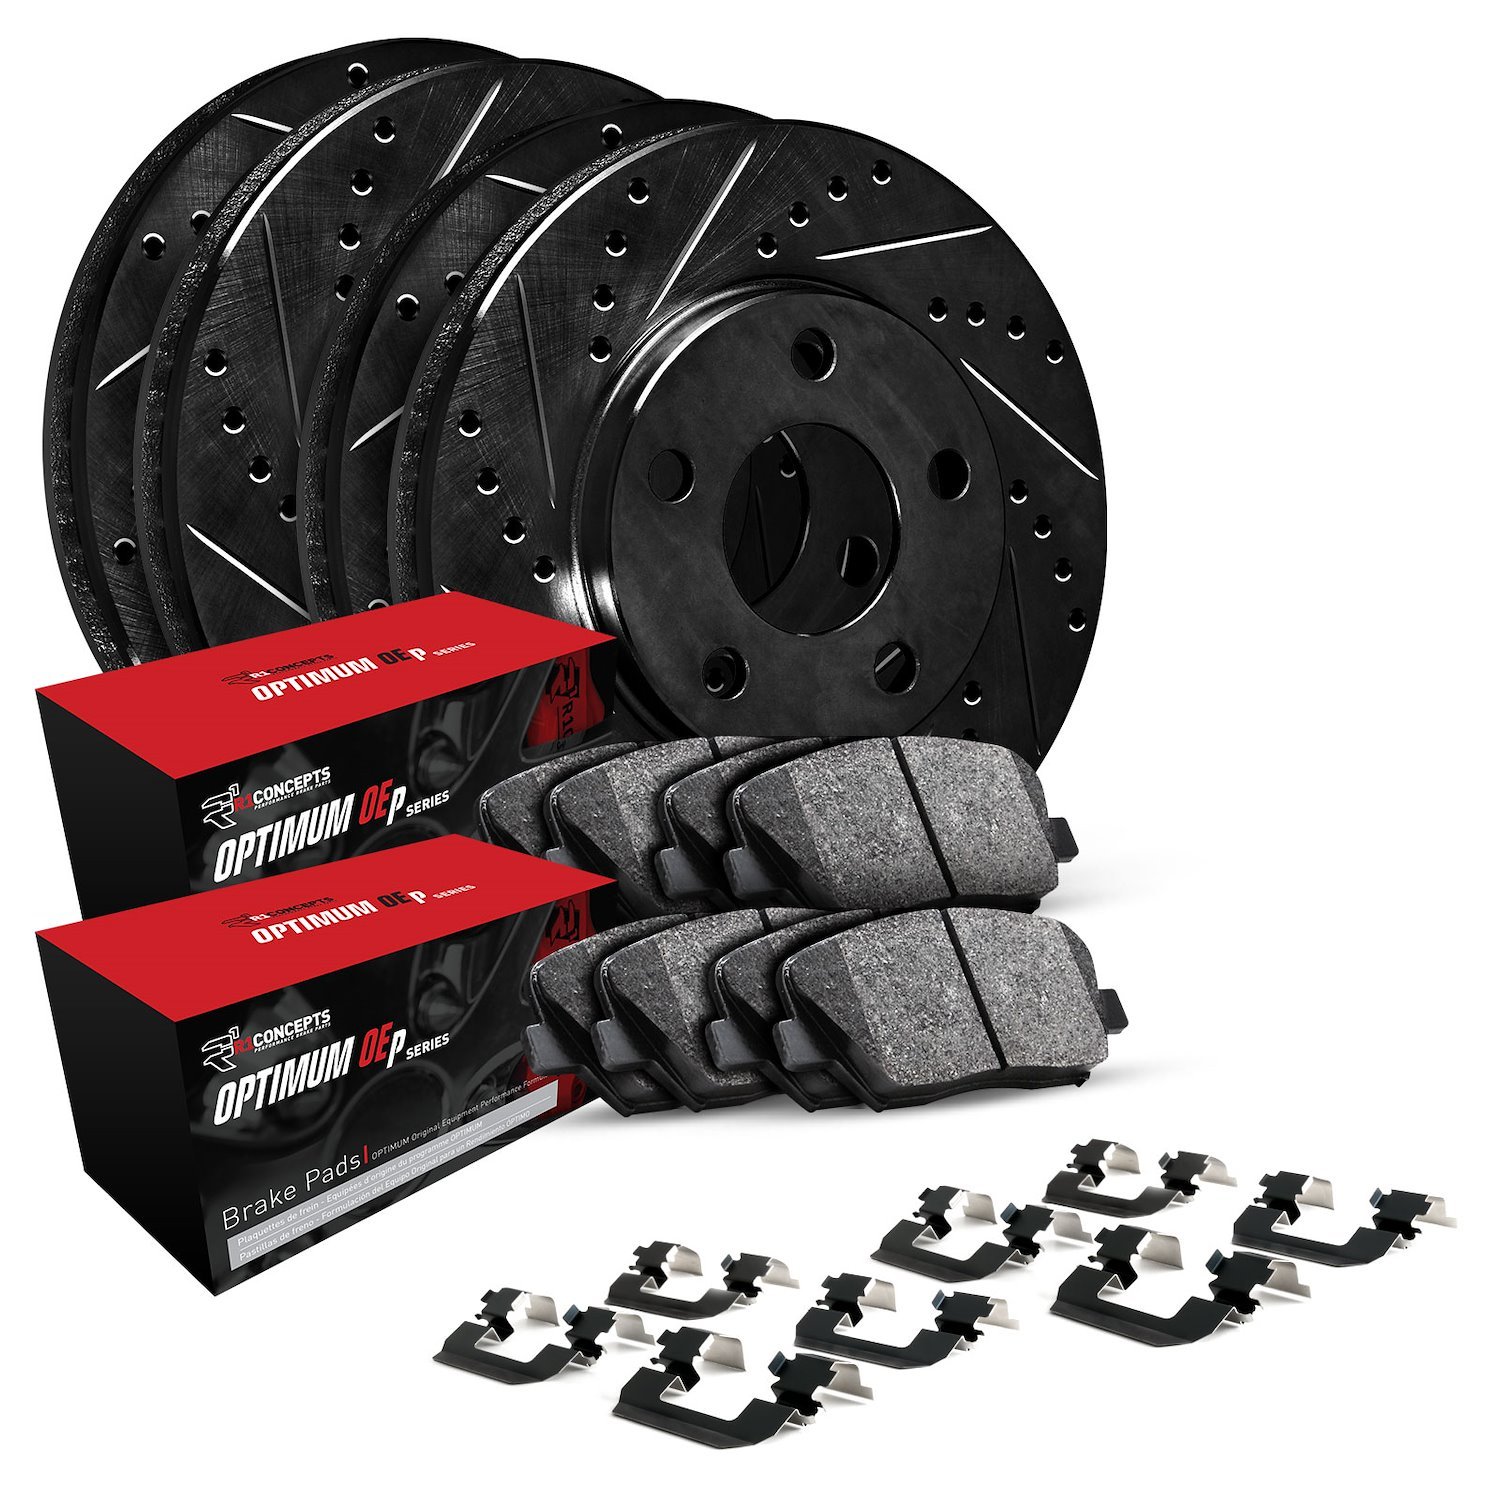 E-Line Drilled & Slotted Black Rotors w/5000 Oep Pads & Hardware Kit, Fits Select Fits Multiple Makes/Models